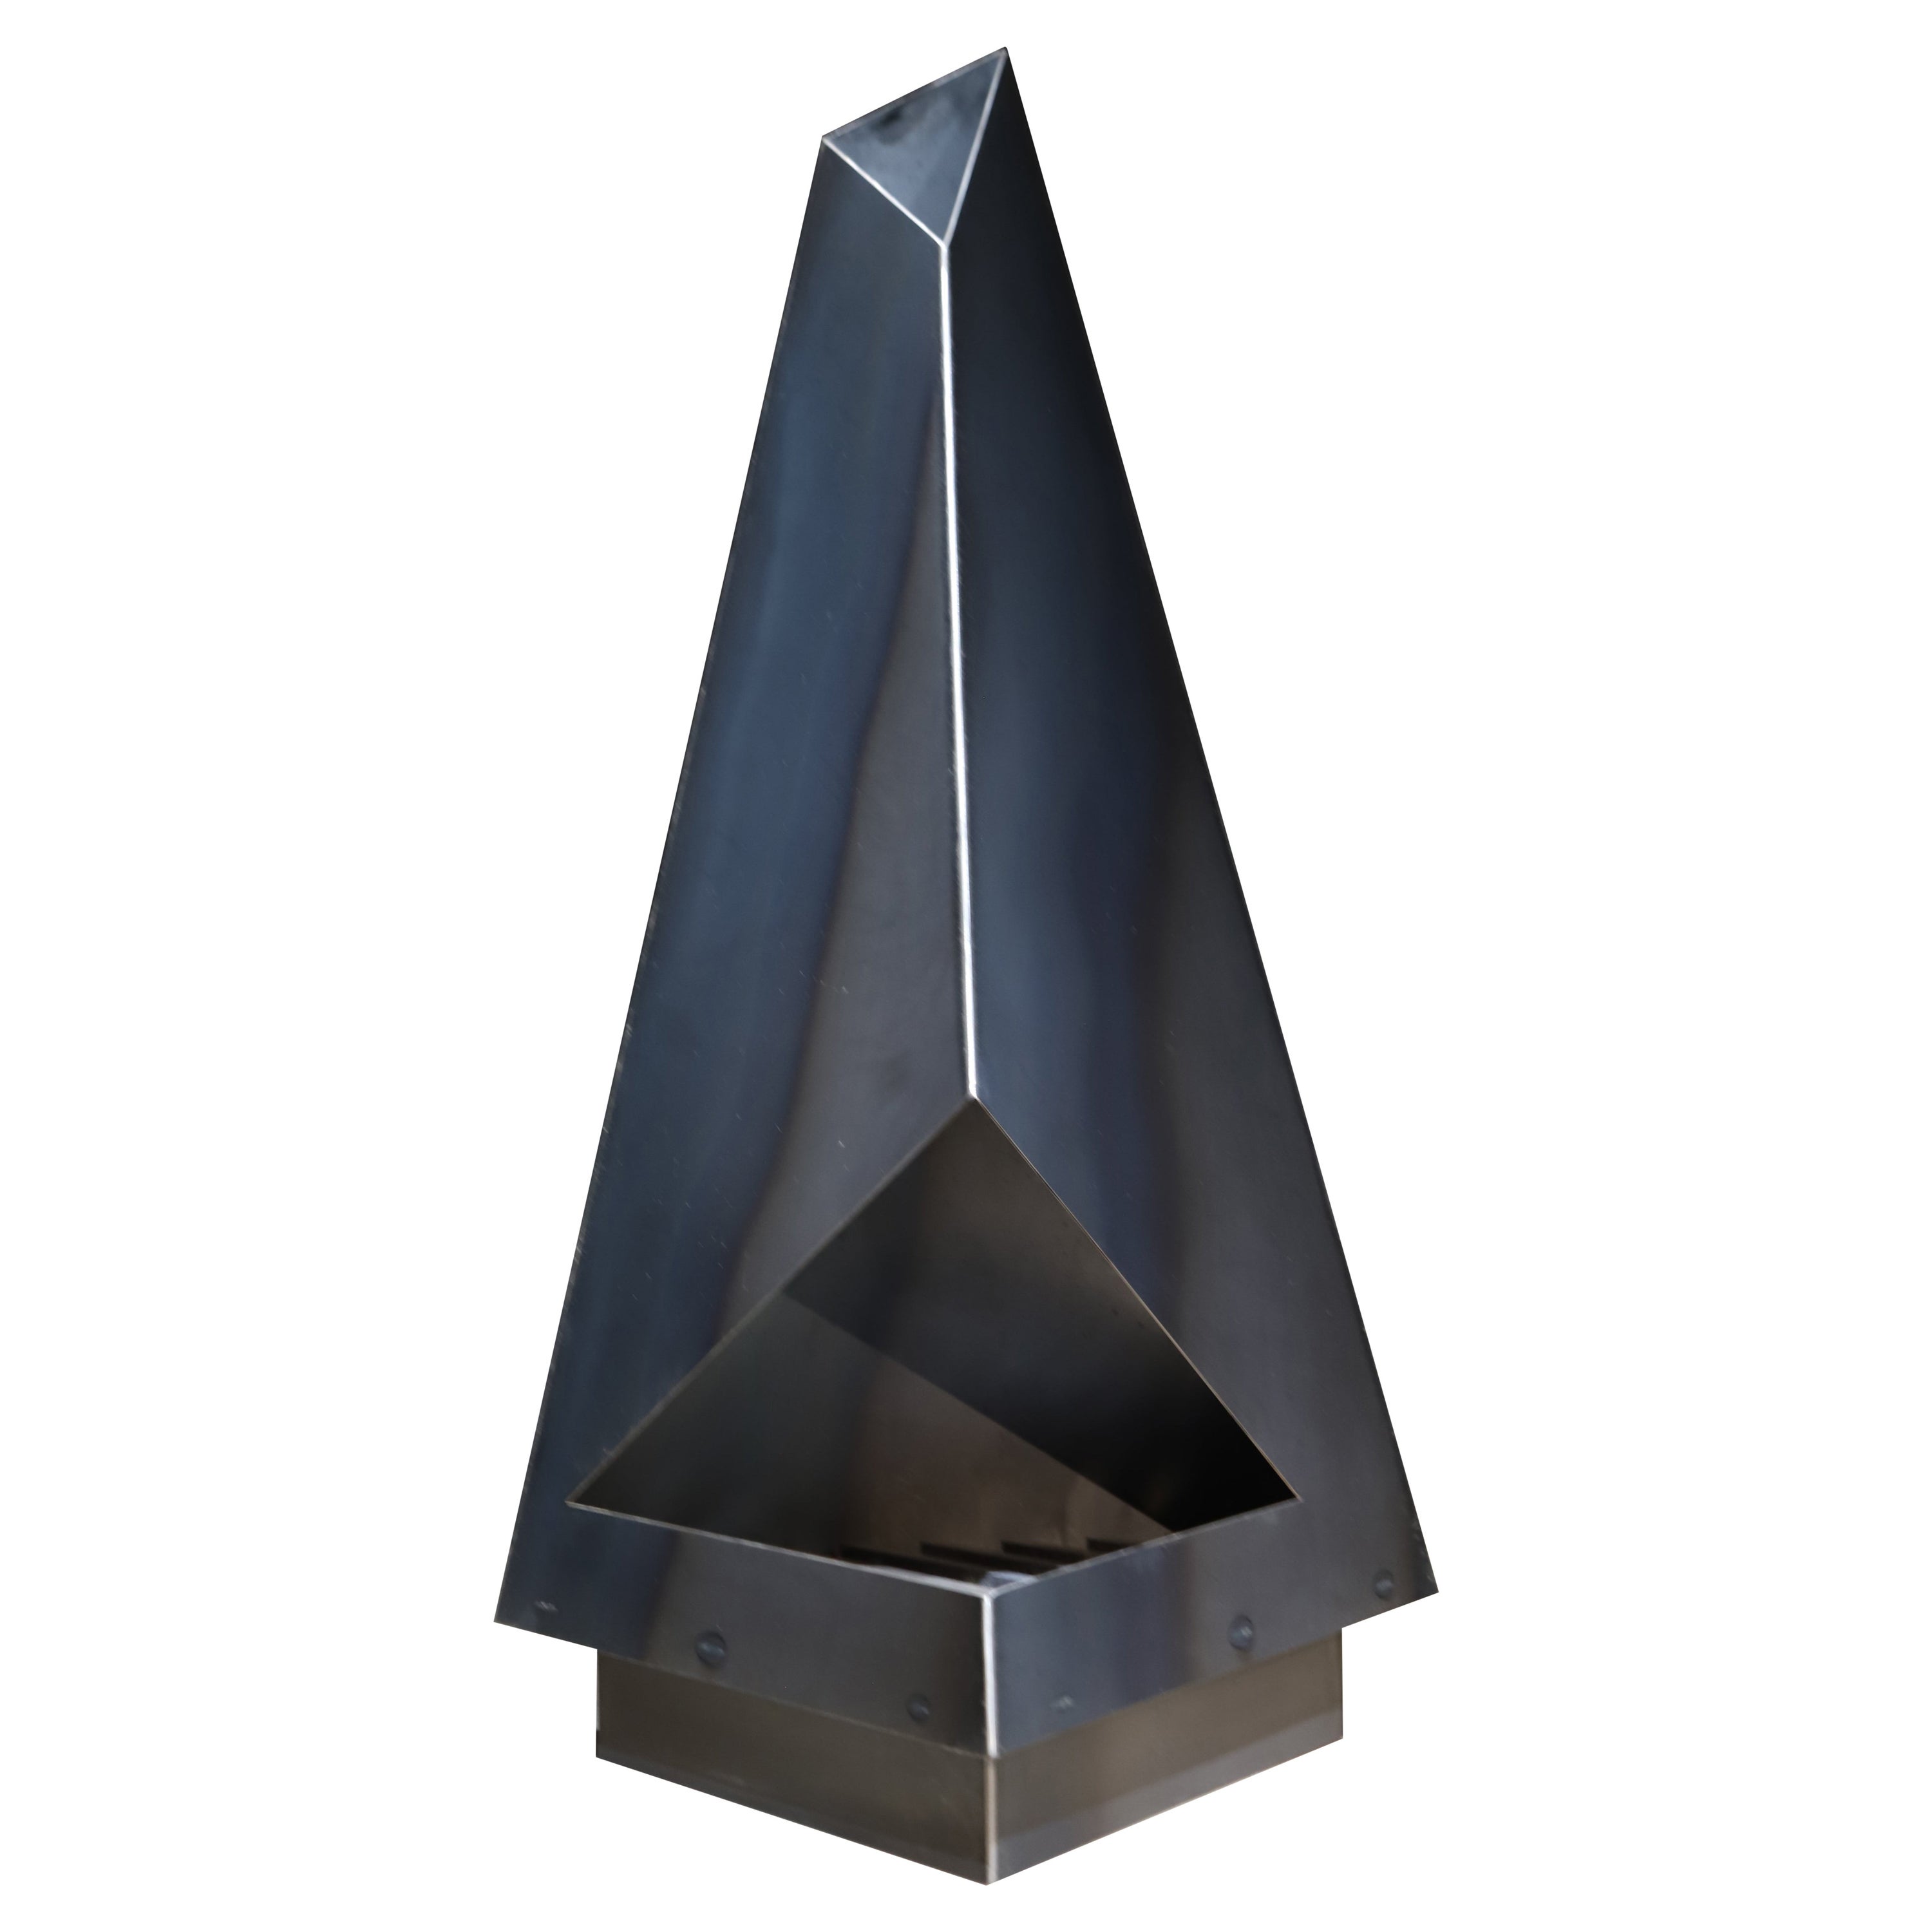 Steel Fire Pit Chiminea Outdoor Fireplace by Koby Knoll Click For Sale